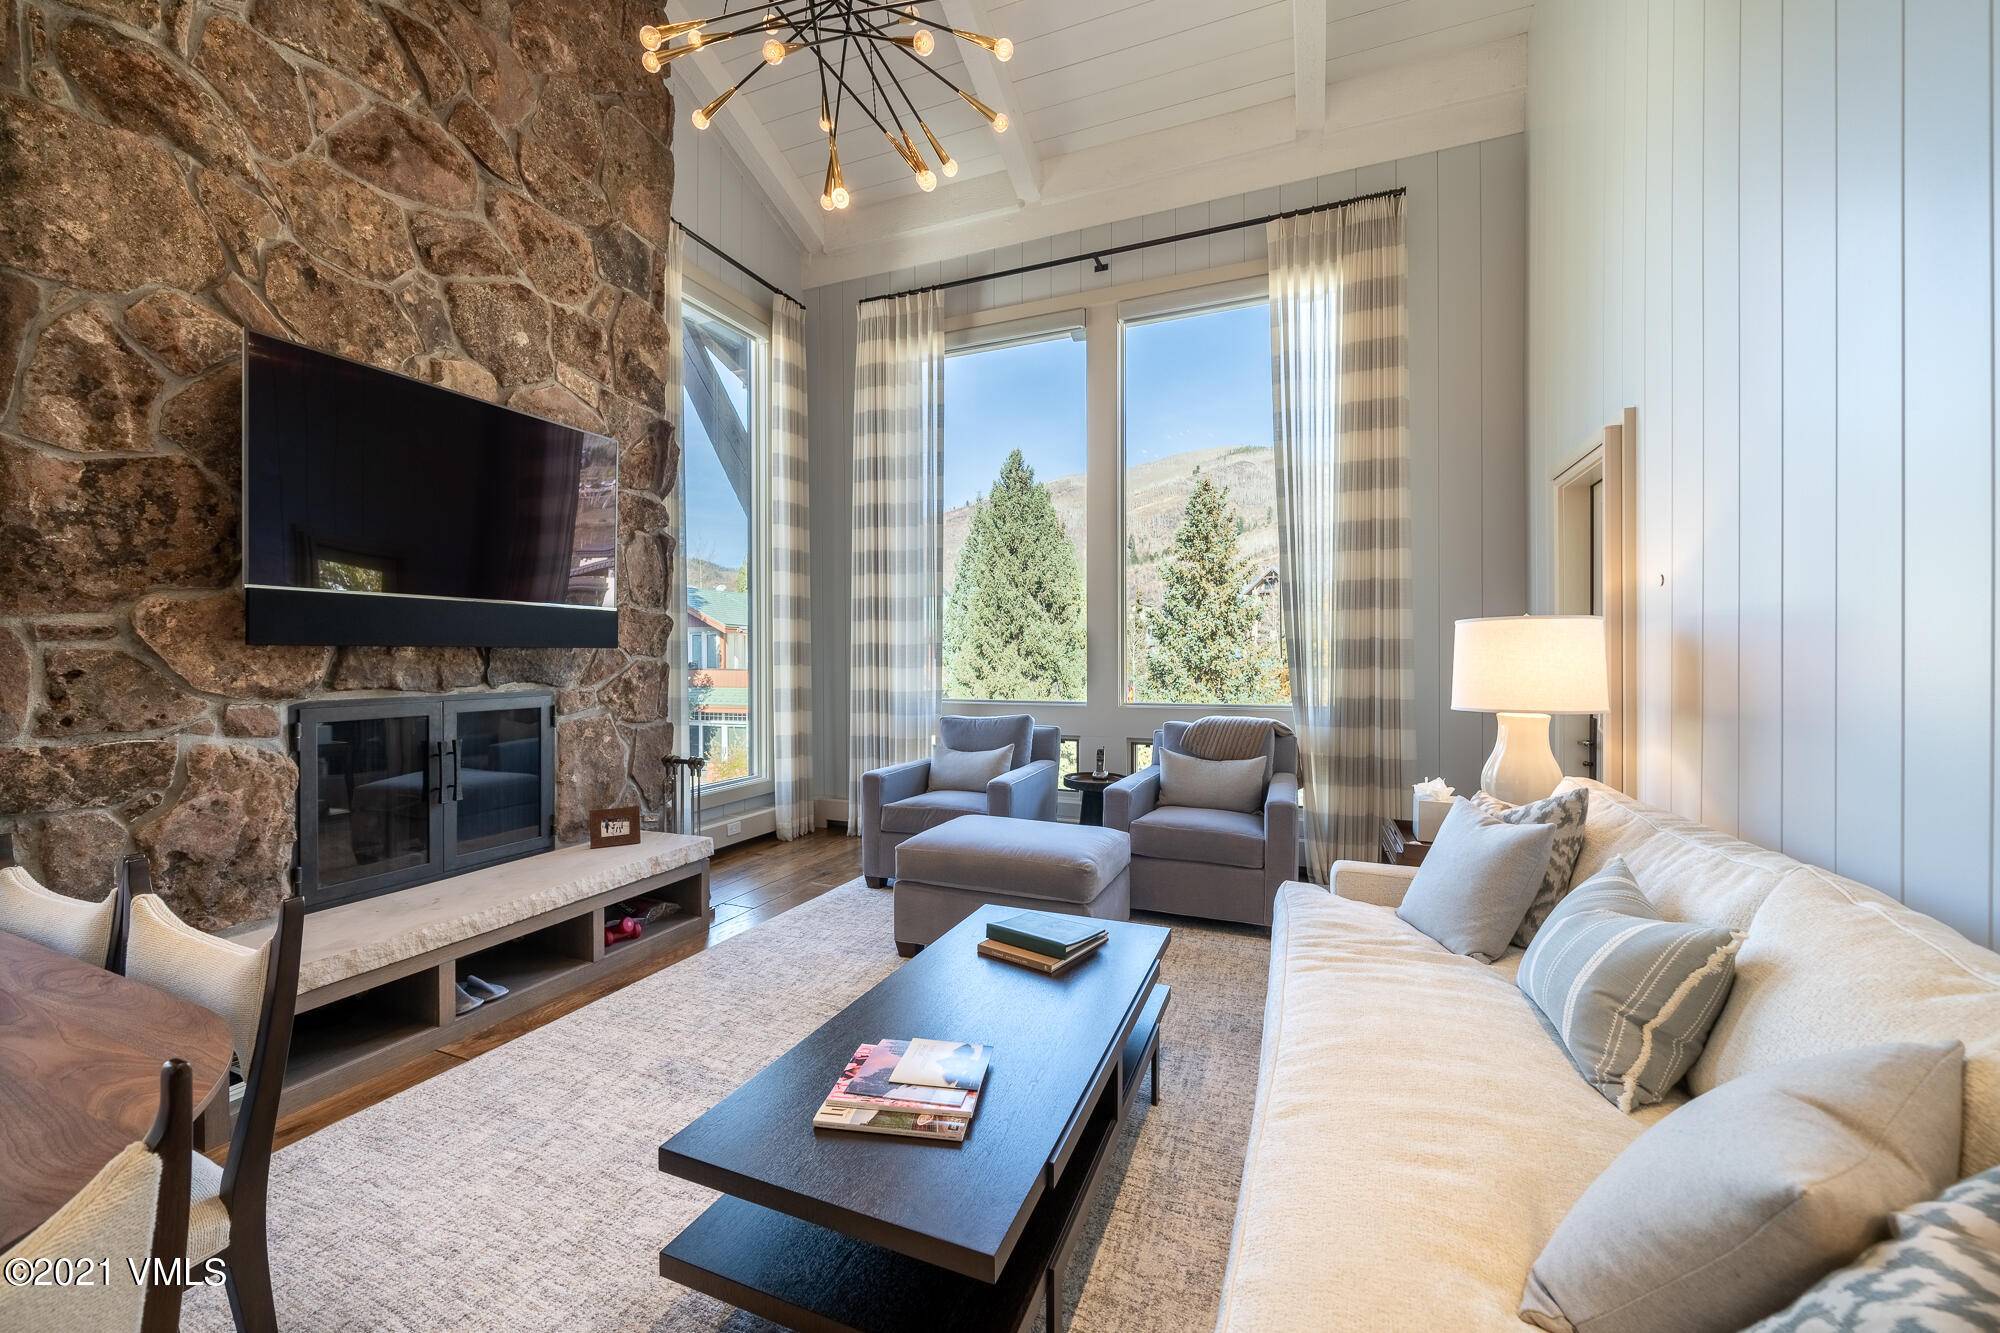 Without question, this is the most spectacular Lodge at Vail condominium to ever hit themarket.